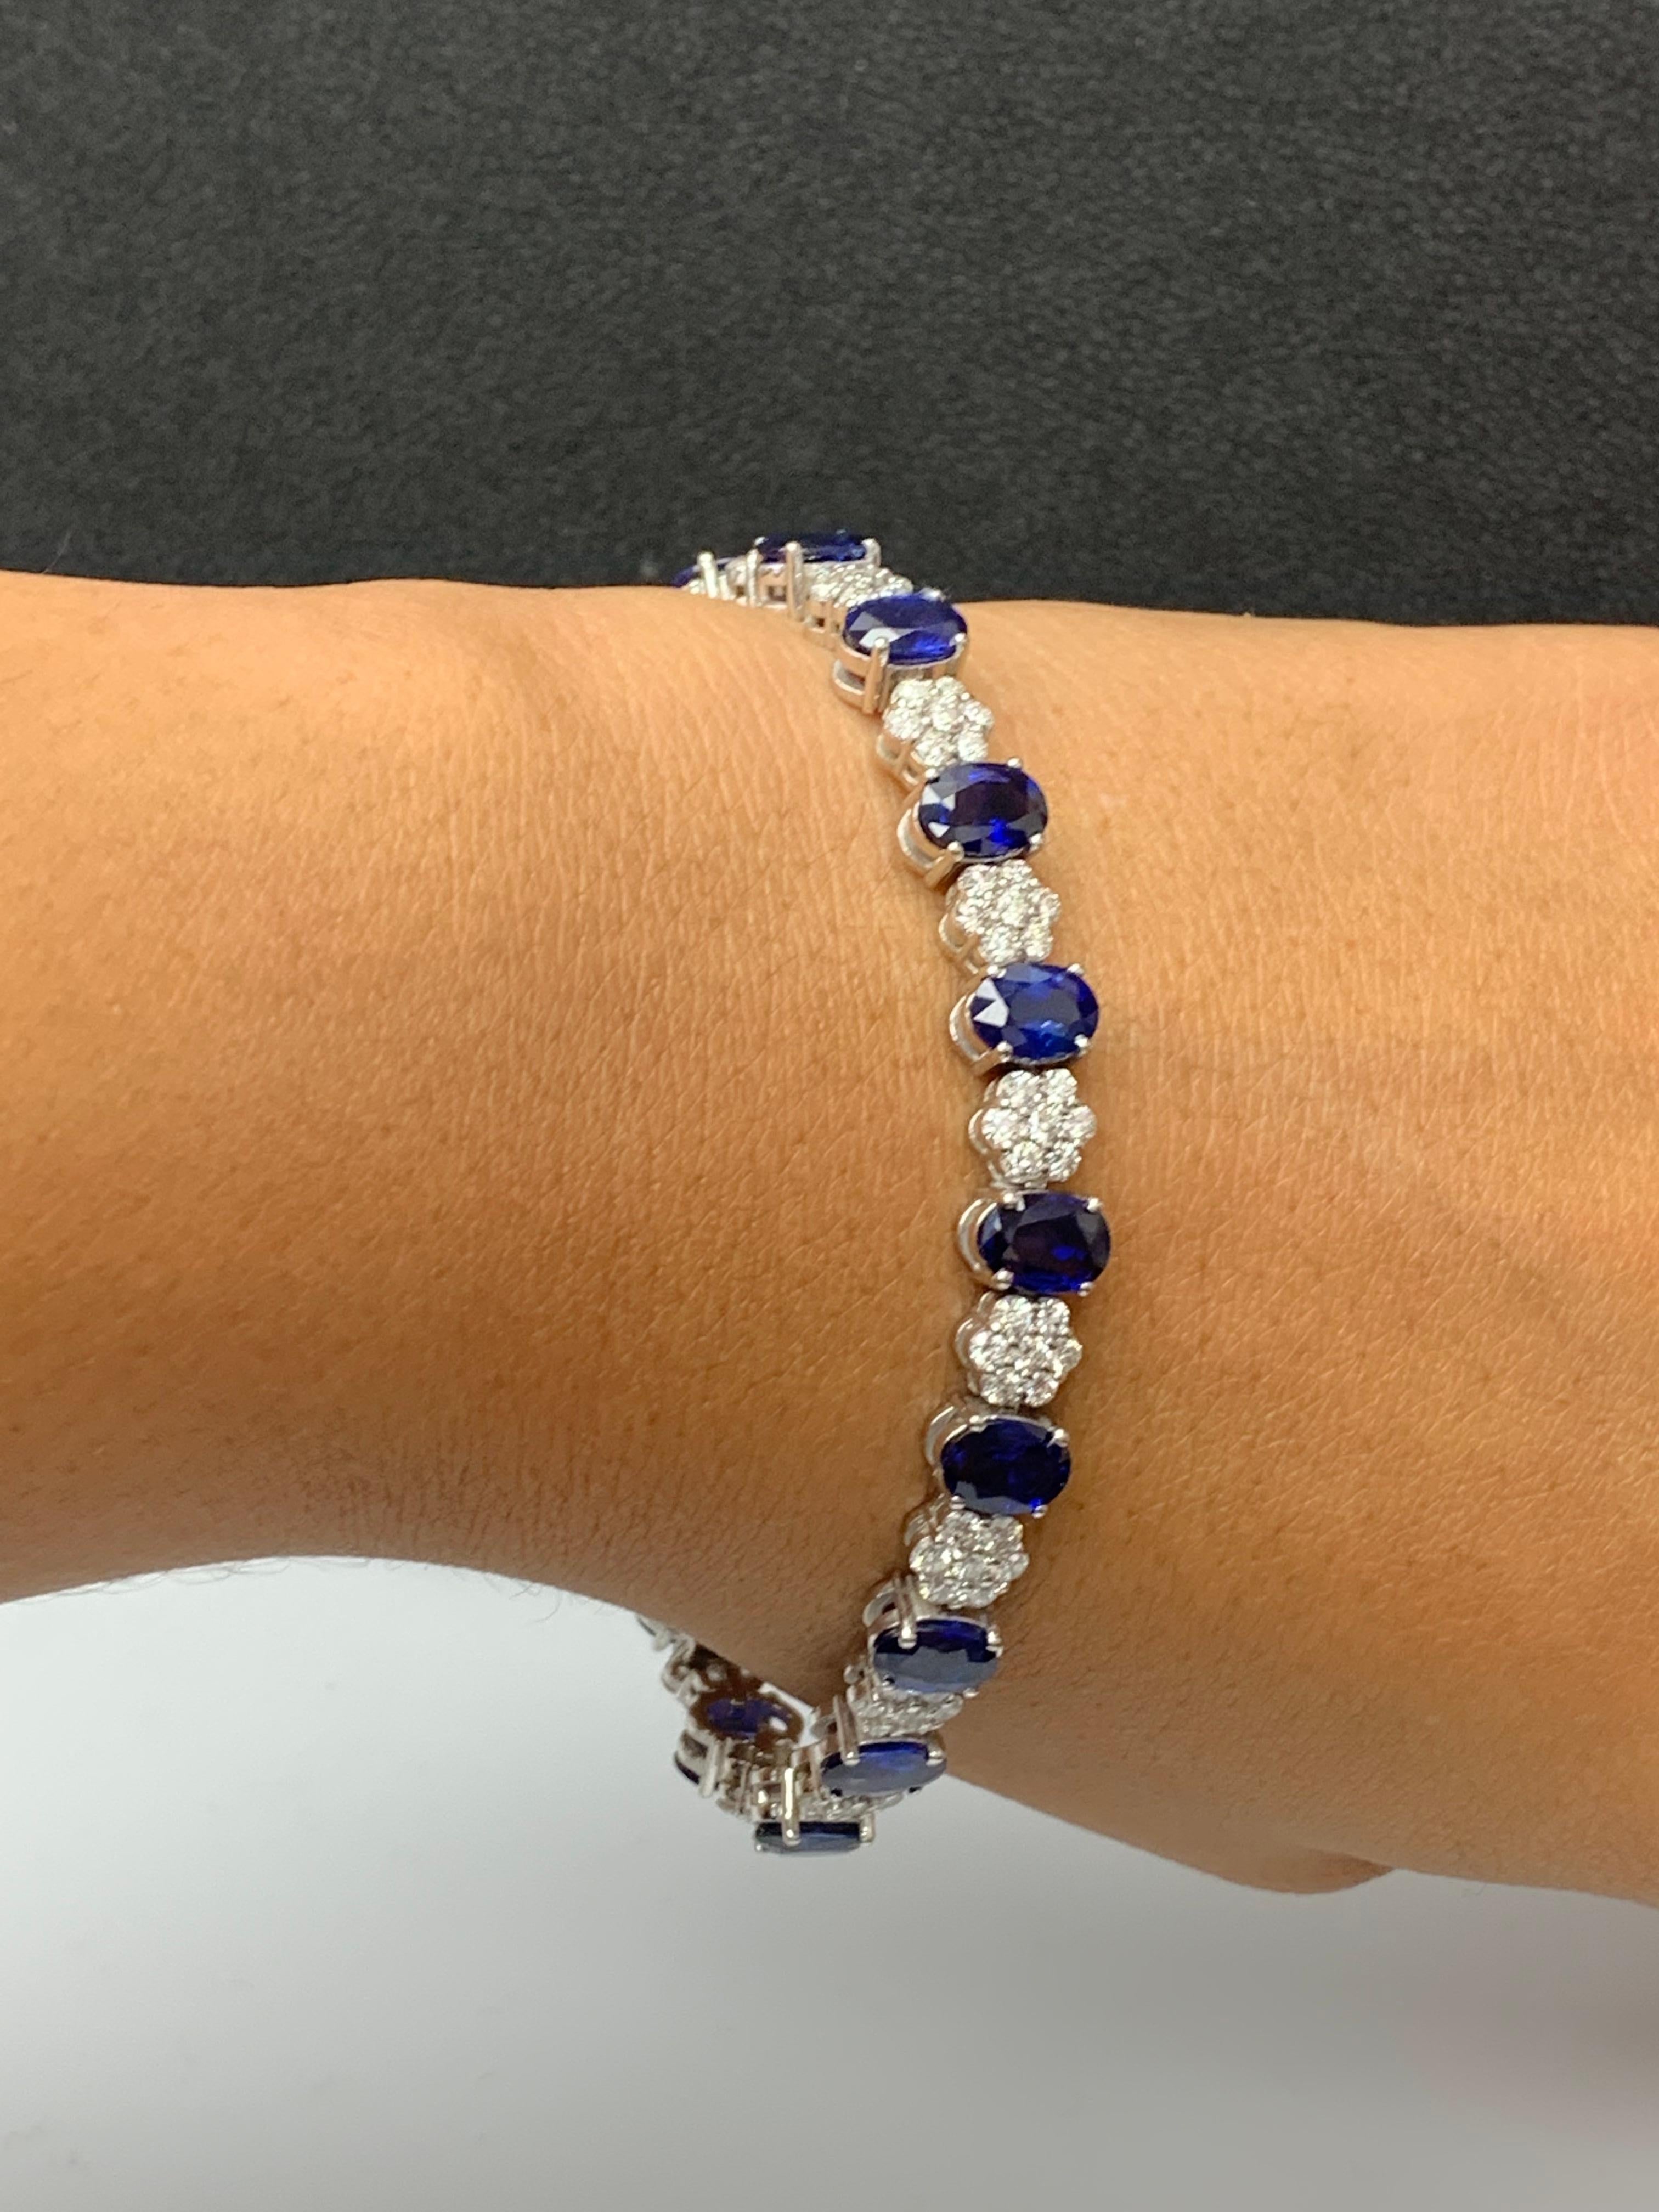 15.26 Carat Oval Cut Blue Sapphire and Diamond Tennis Bracelet in 14K White Gold For Sale 5